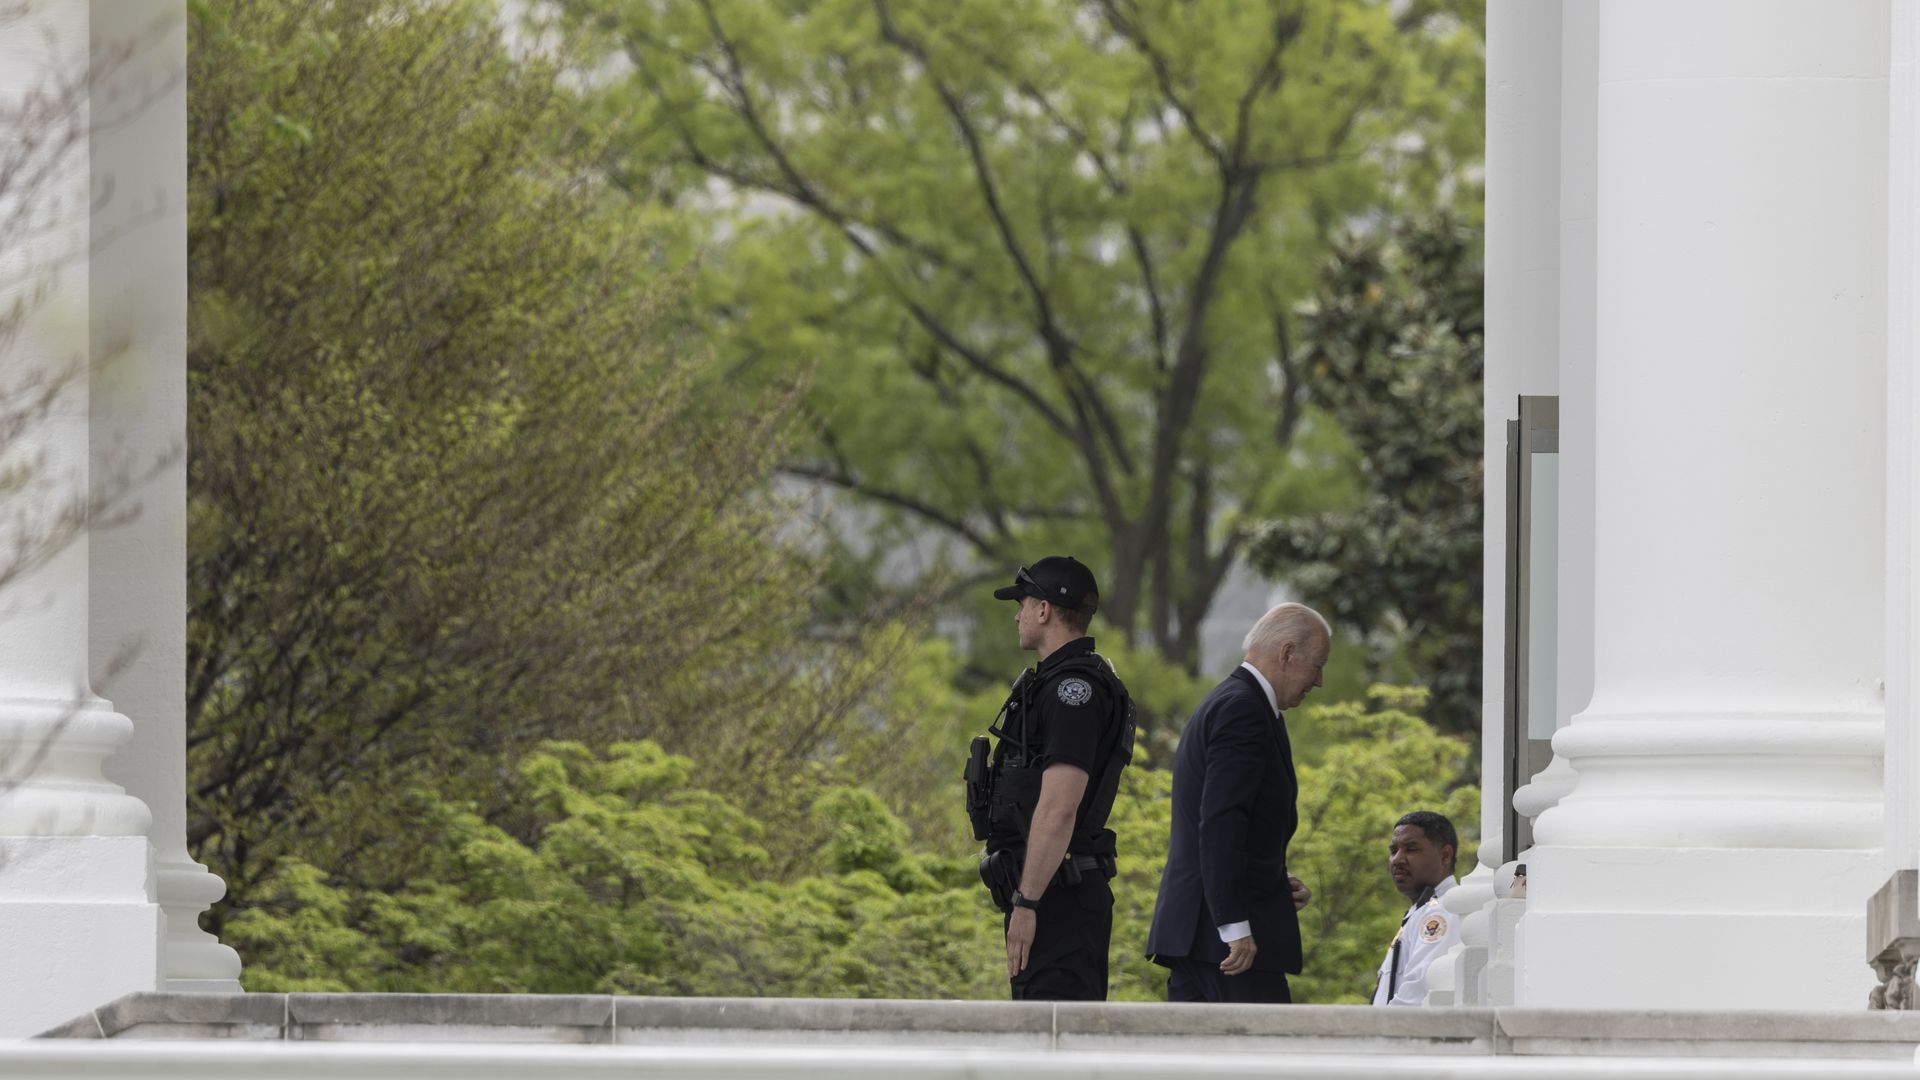 President Biden is seen entering the White House from the North Portico after returning from Delaware.